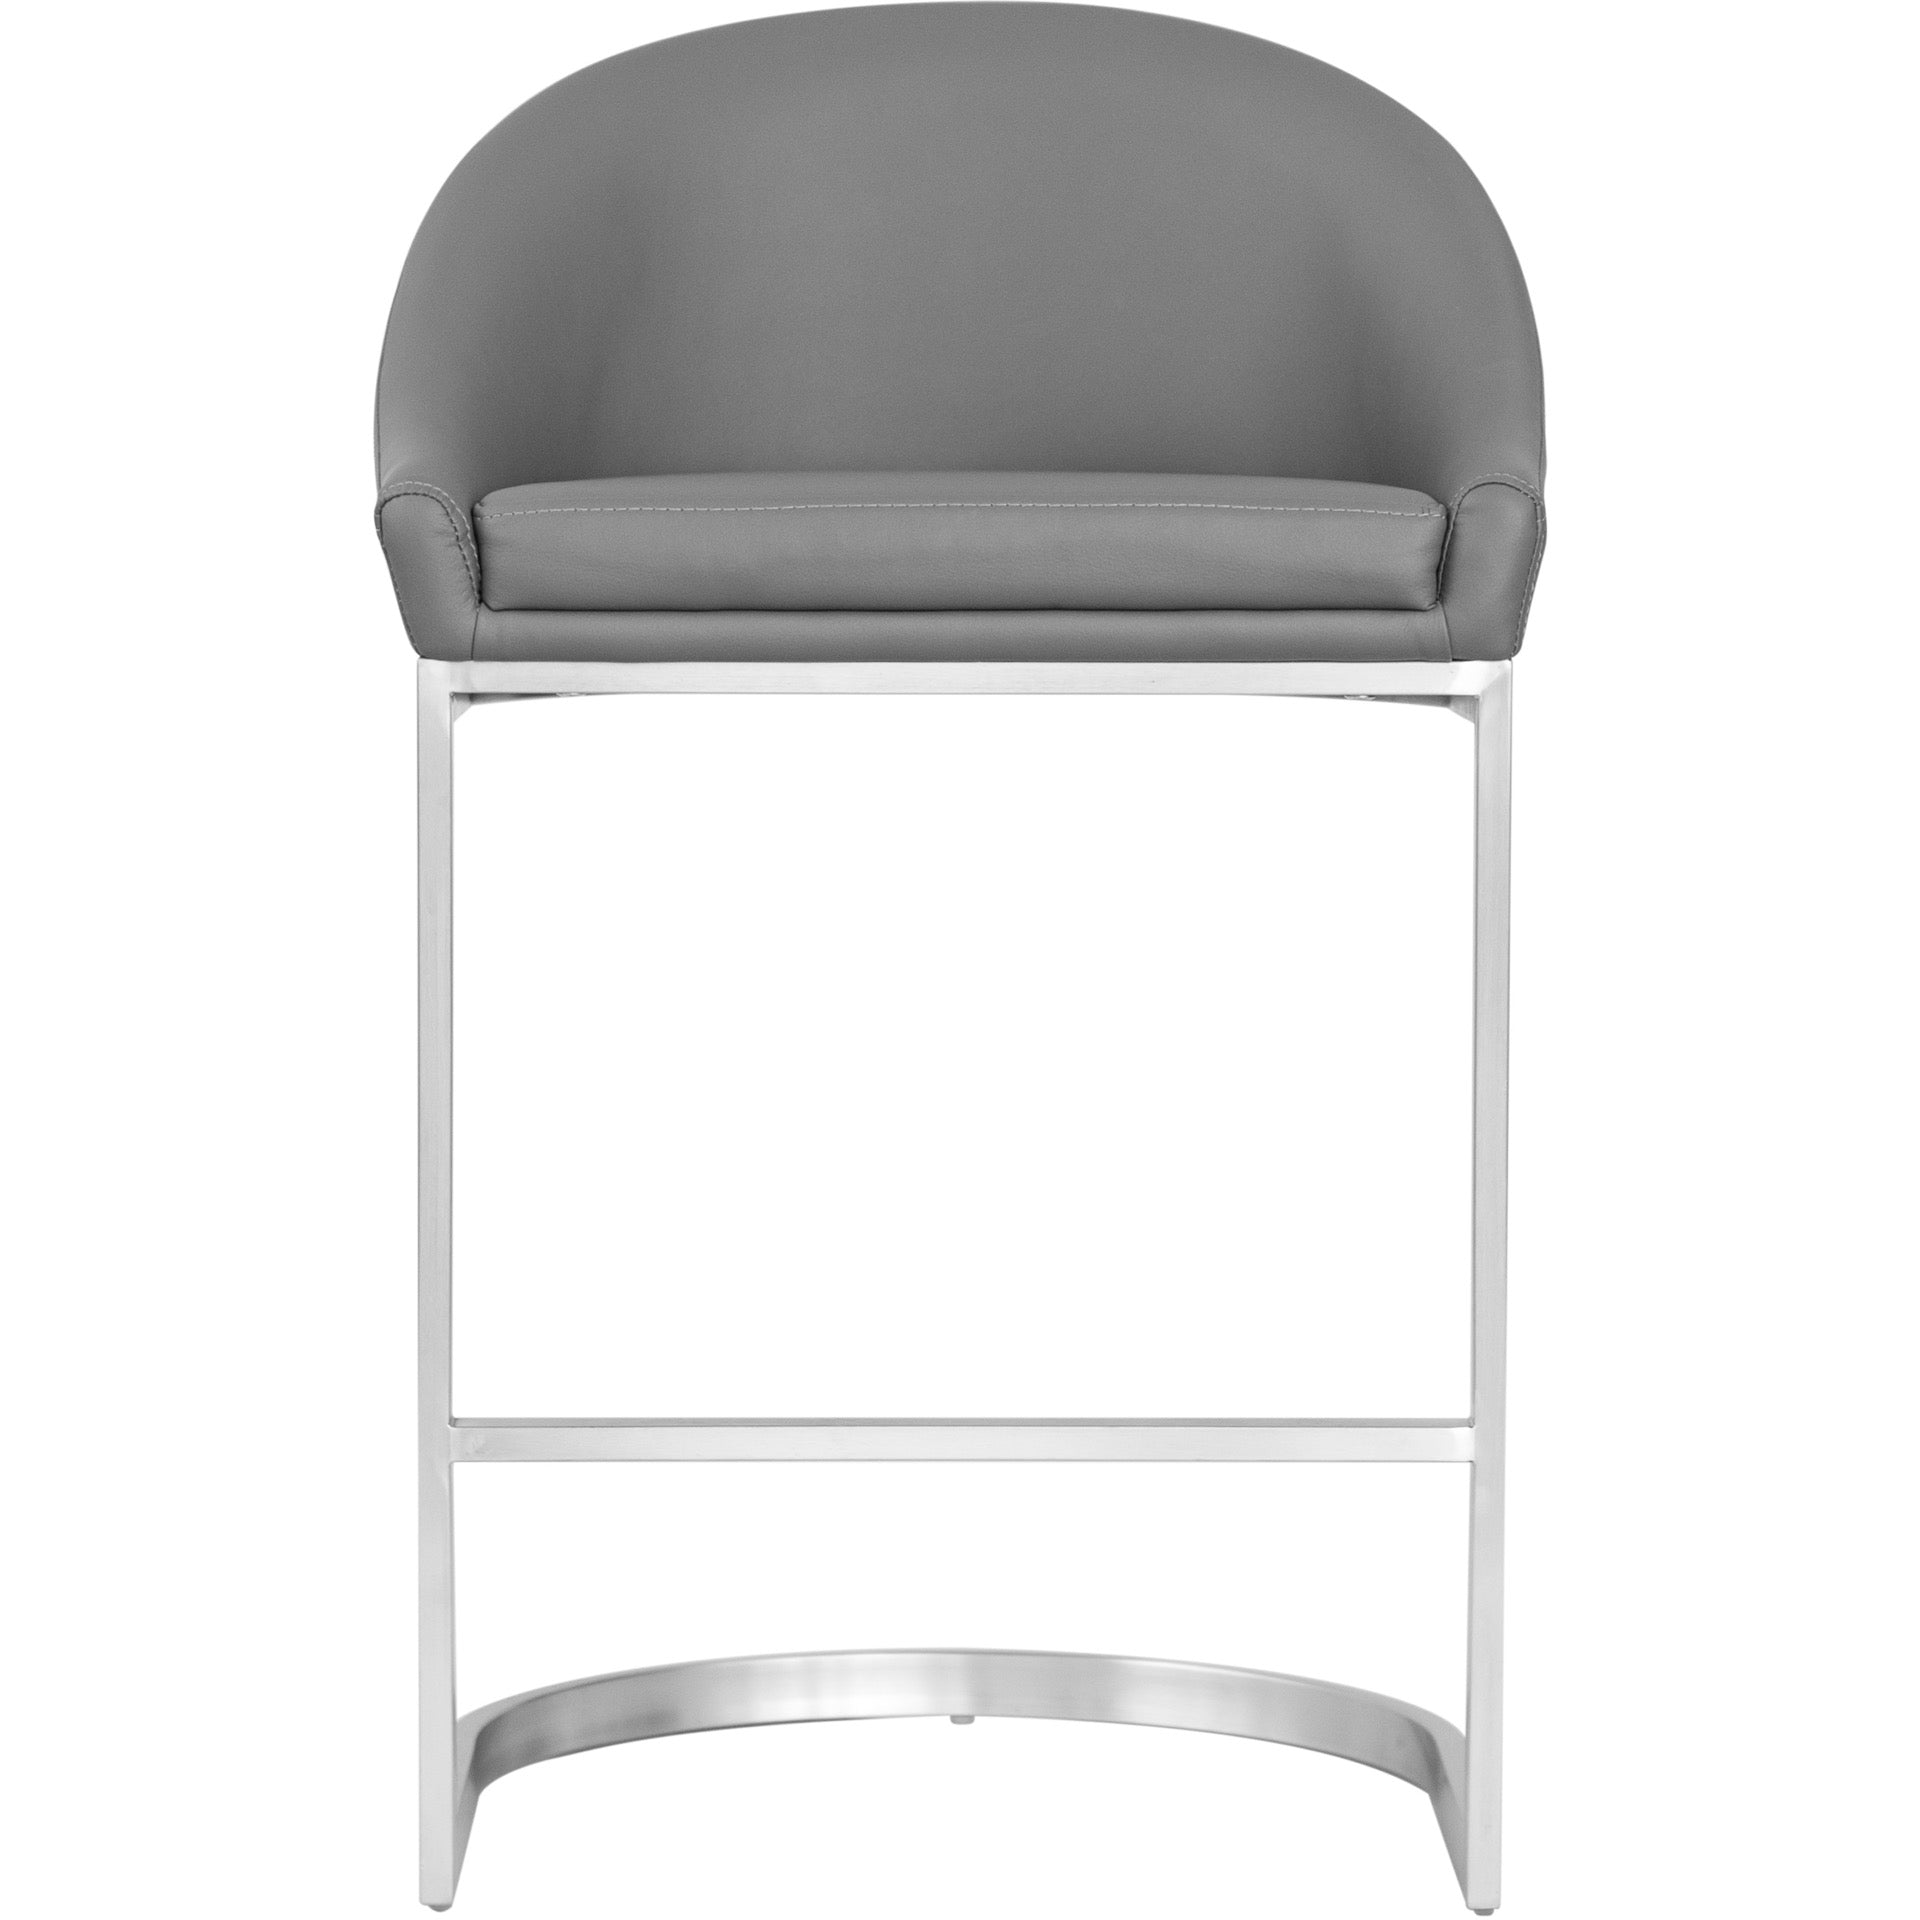 Brushed Stainless Steel Curved Stationary Counter Stool